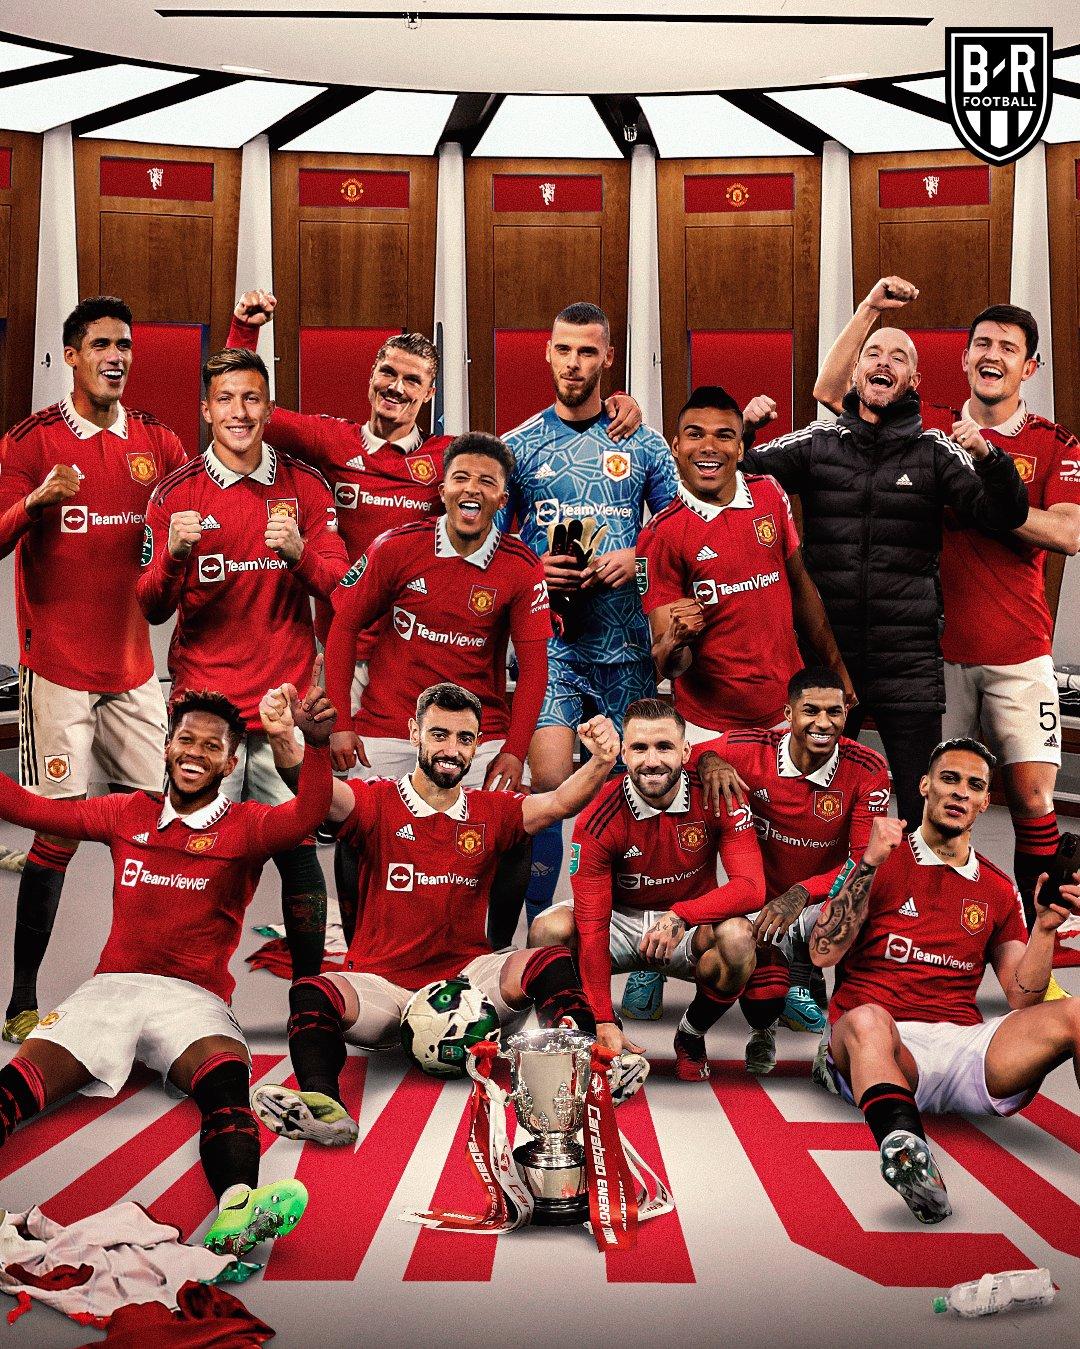 BR Football on MANCHESTER UNITED WIN THE LEAGUE CUP